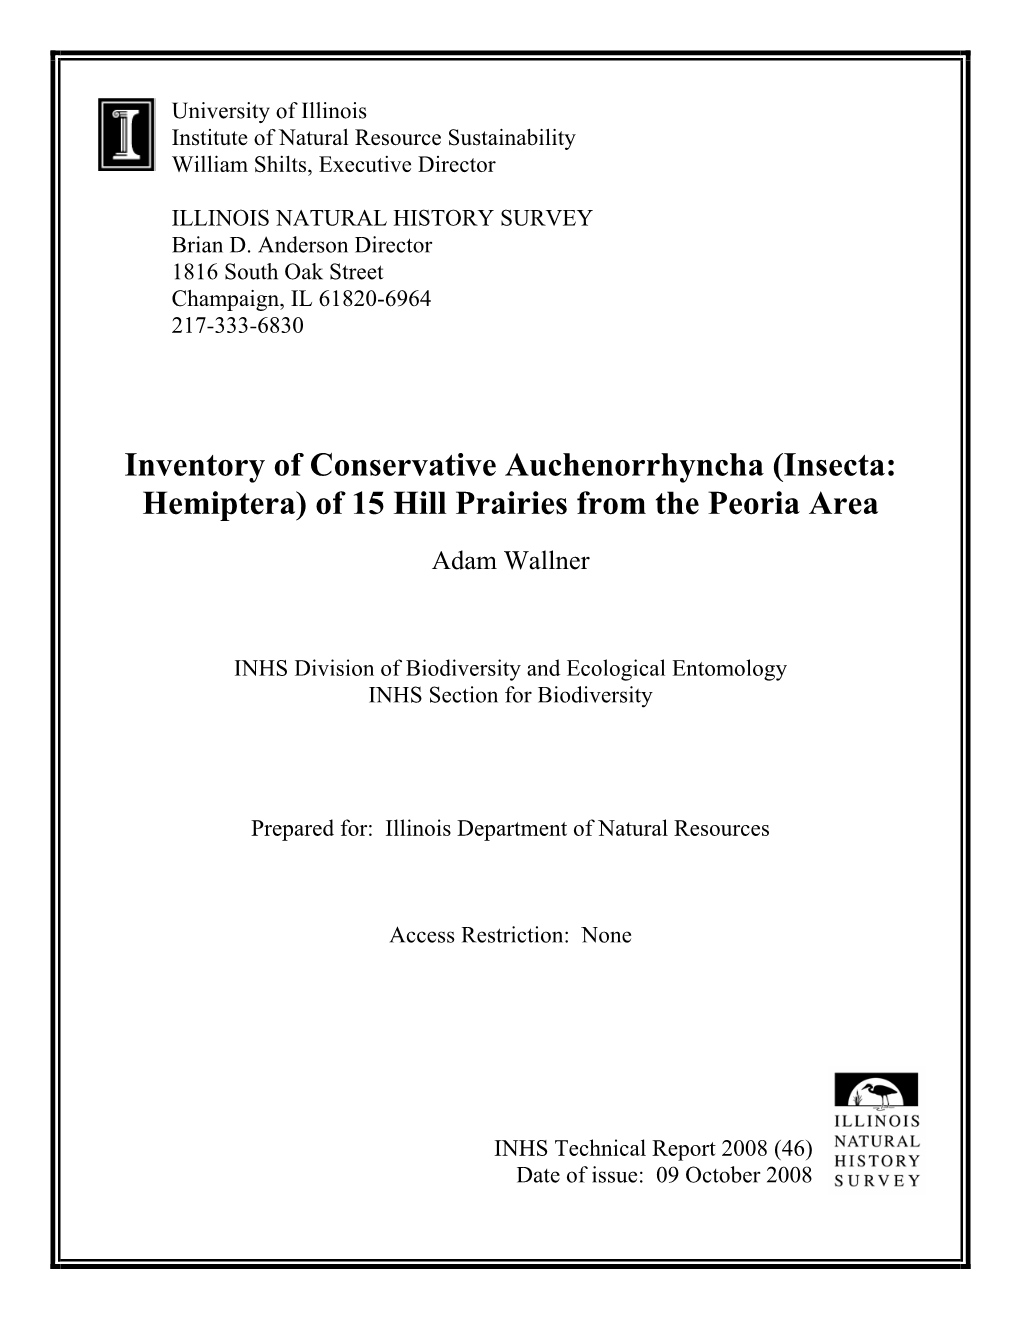 Inventory of Conservative Auchenorrhyncha (Insecta: Hemiptera) of 15 Hill Prairies from the Peoria Area